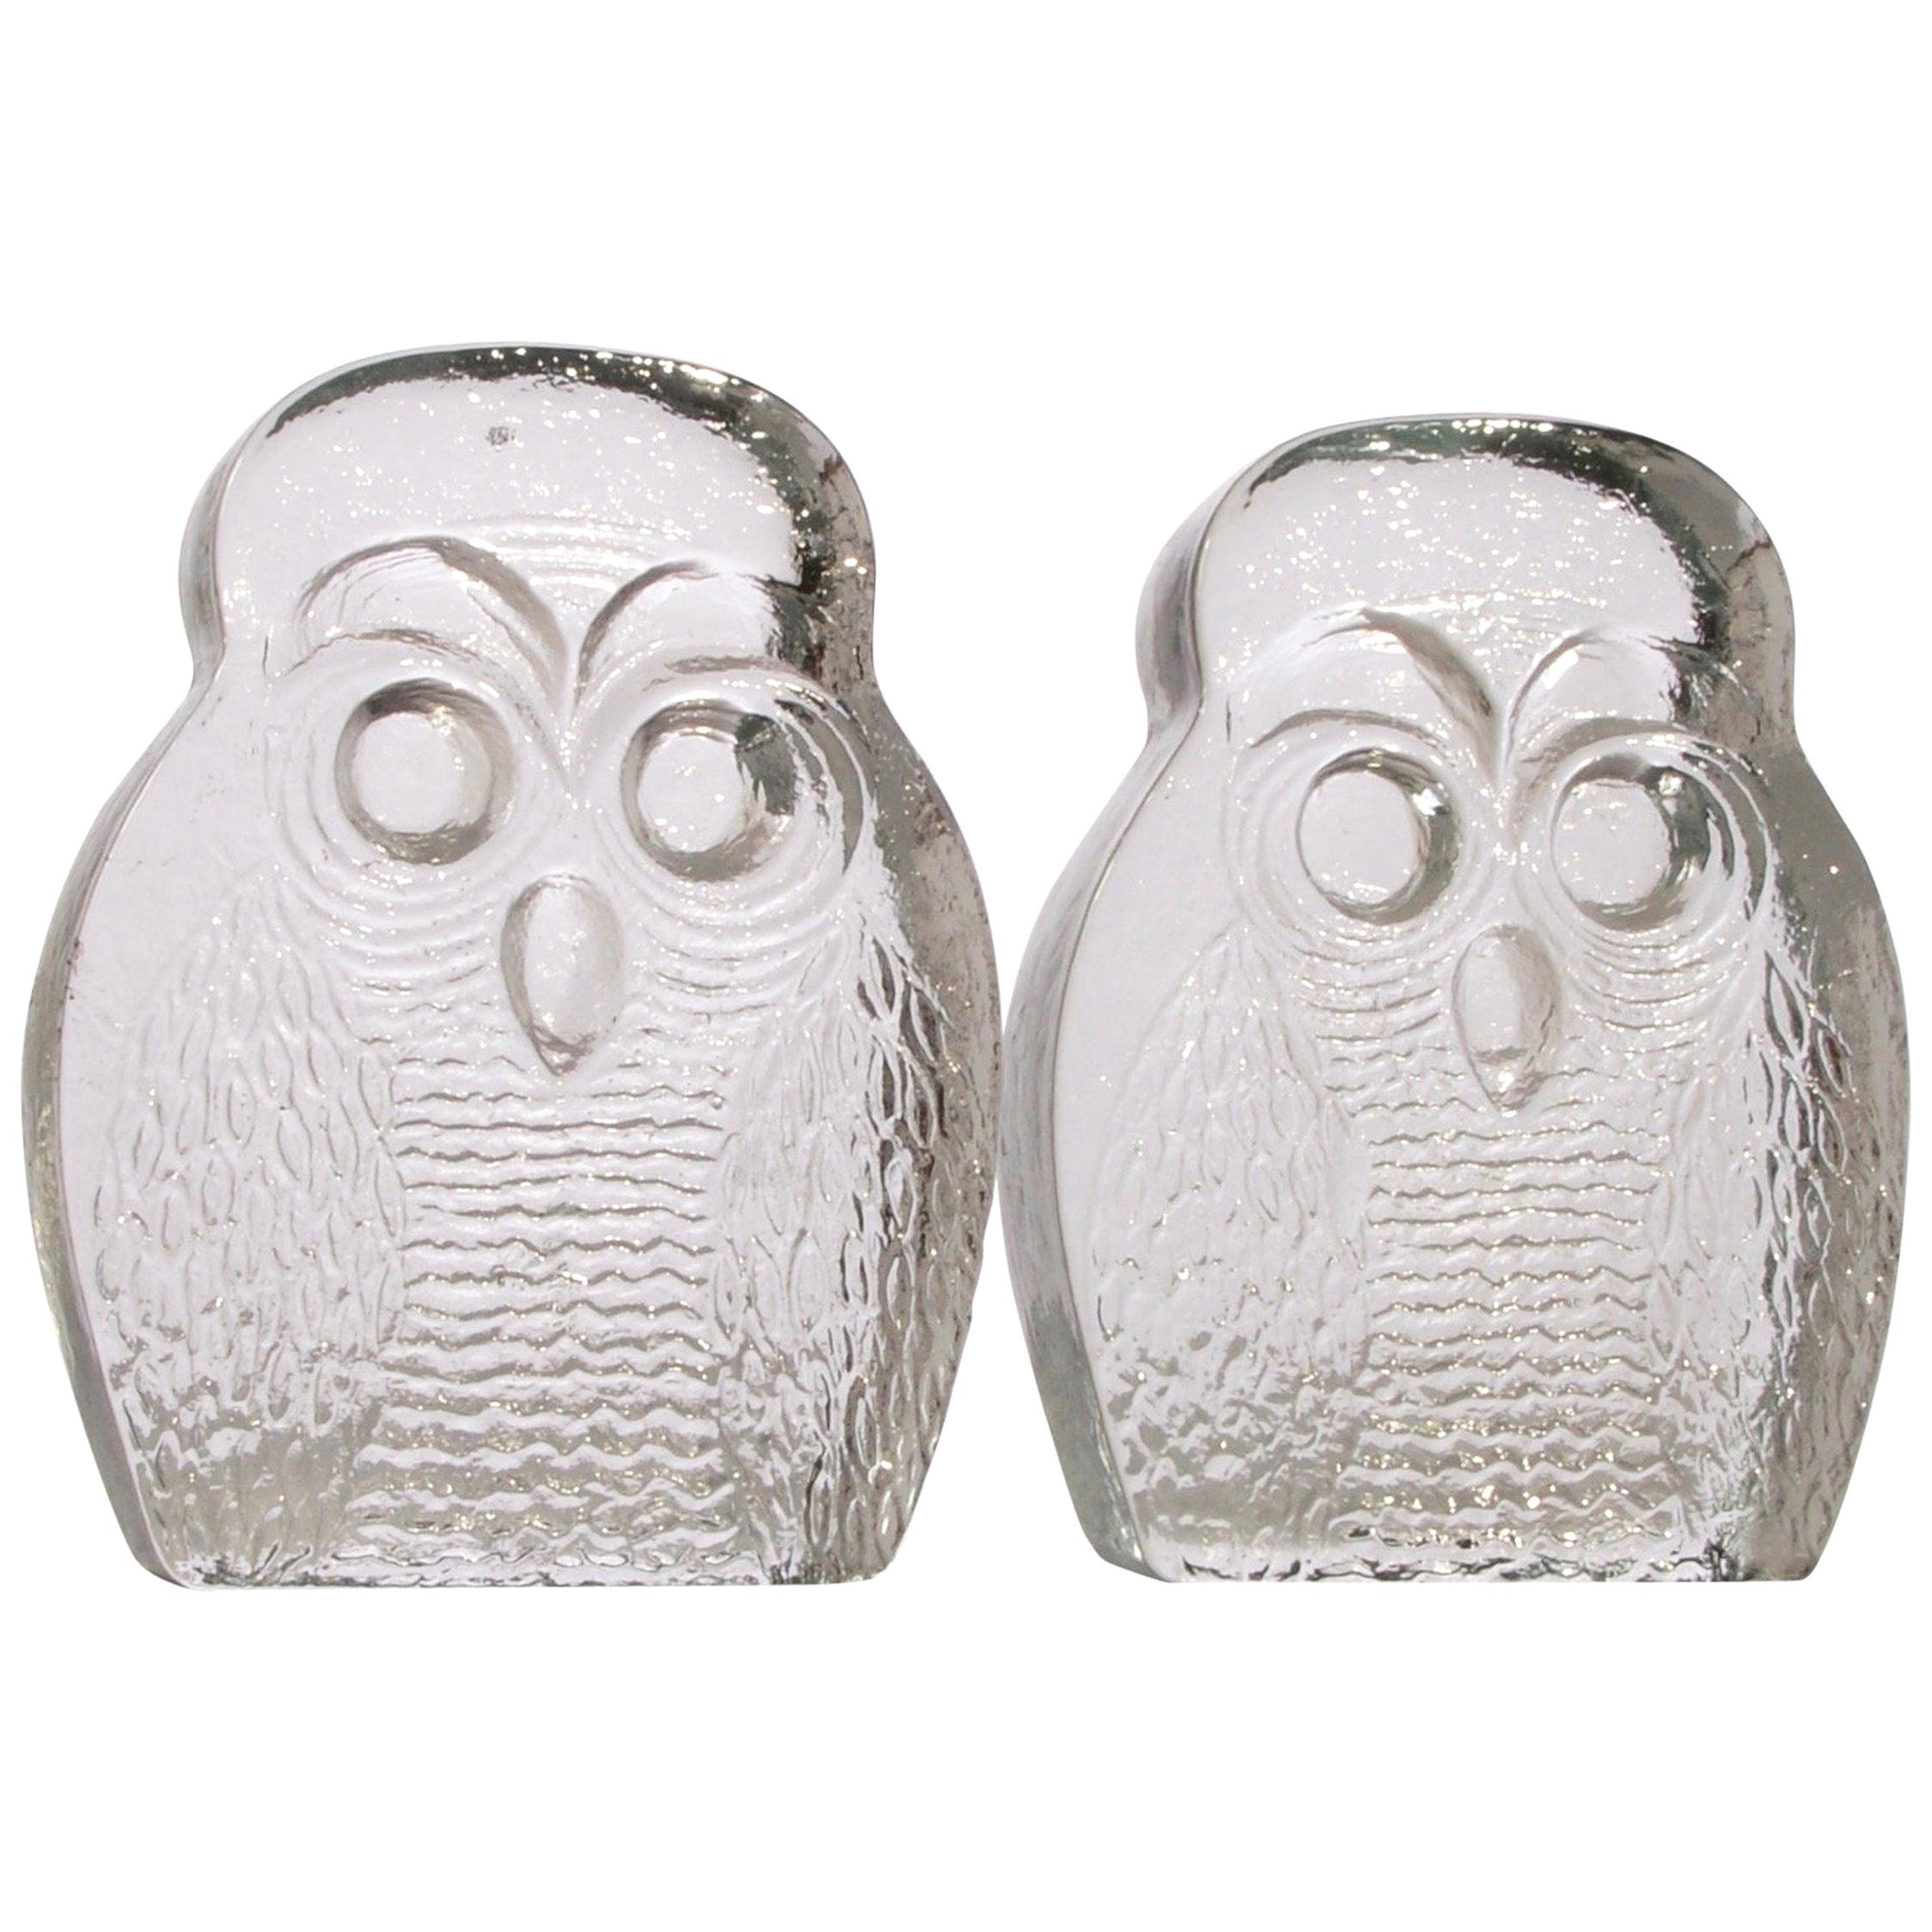 Owl Bookends by Blenko